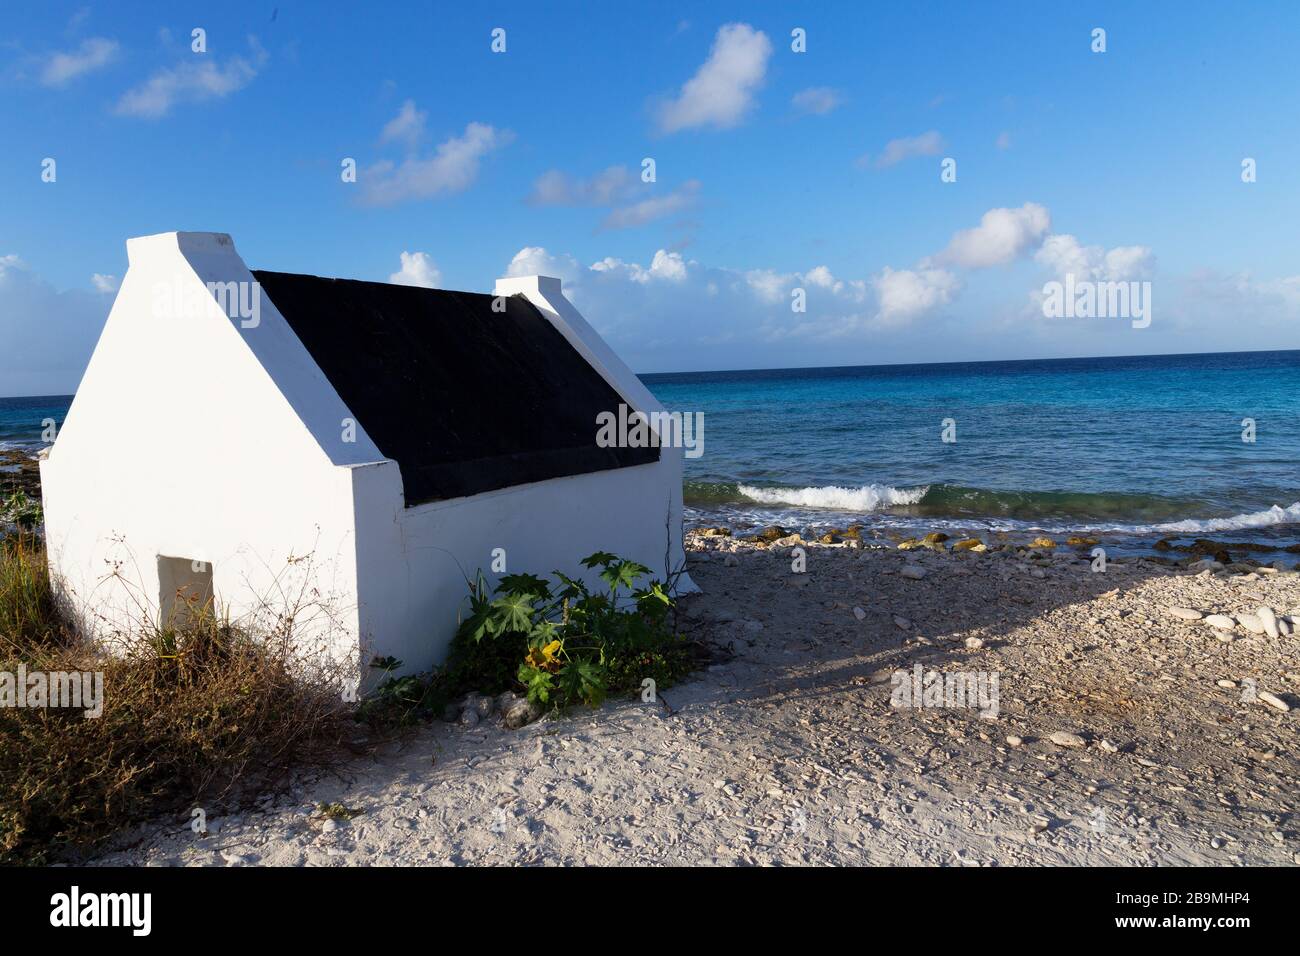 Historic white slave huts on the coast of Bonaire, of the ABC Islands Dutch Antillies, Carbbean Sea Stock Photo